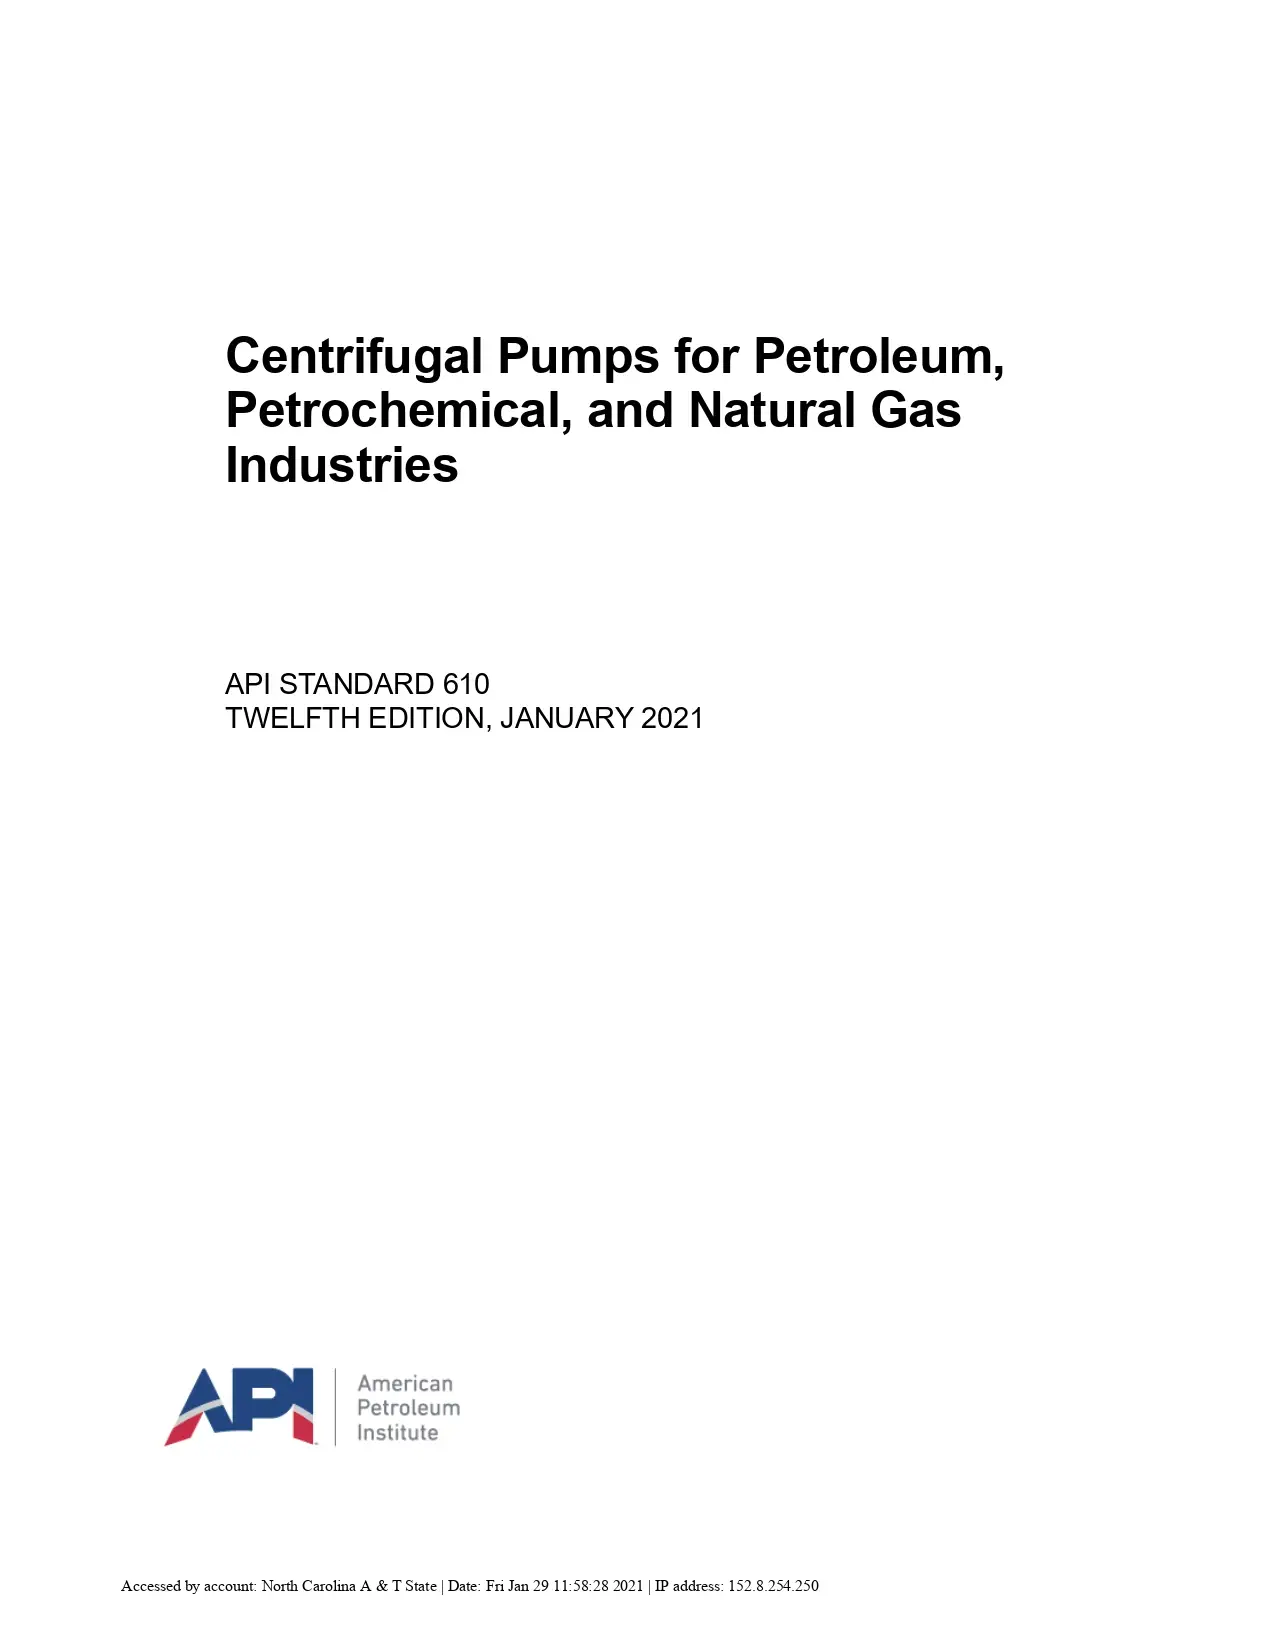 Centrifugal Pumps for Petroleum, Petrochemical, and Natural Gas Industries